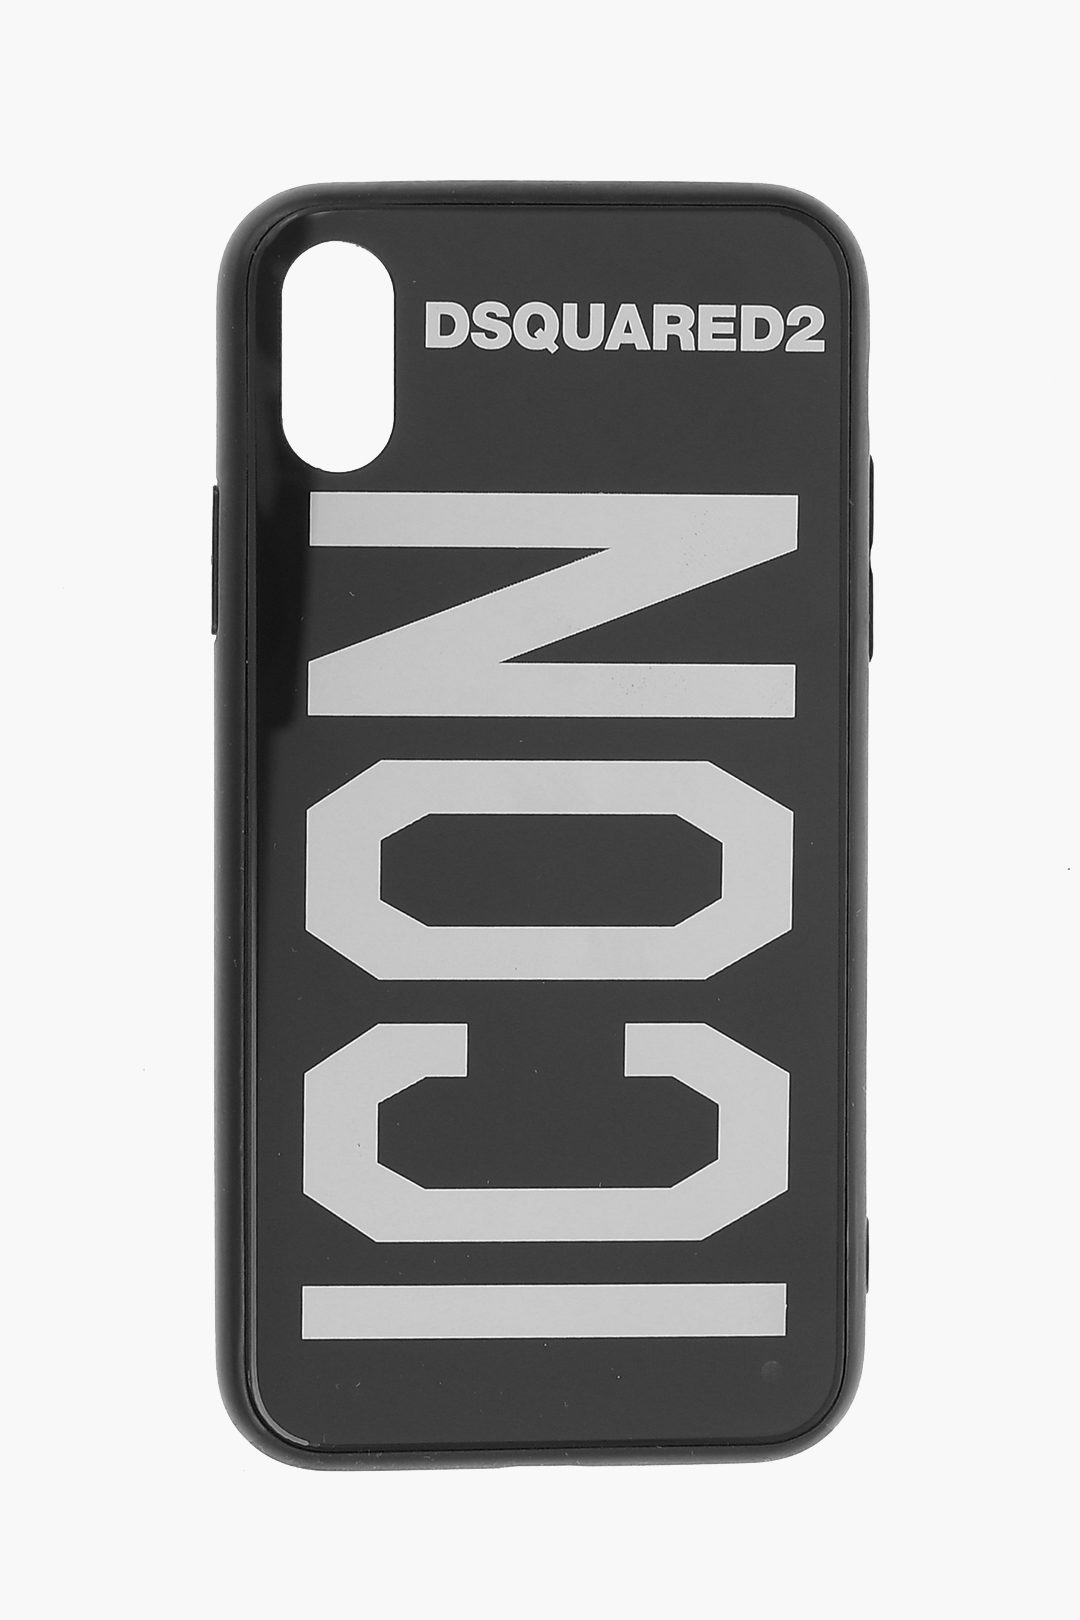 diepte Leia stuiten op Dsquared2 Printed iPhone X/XS Cover unisex men women - Glamood Outlet